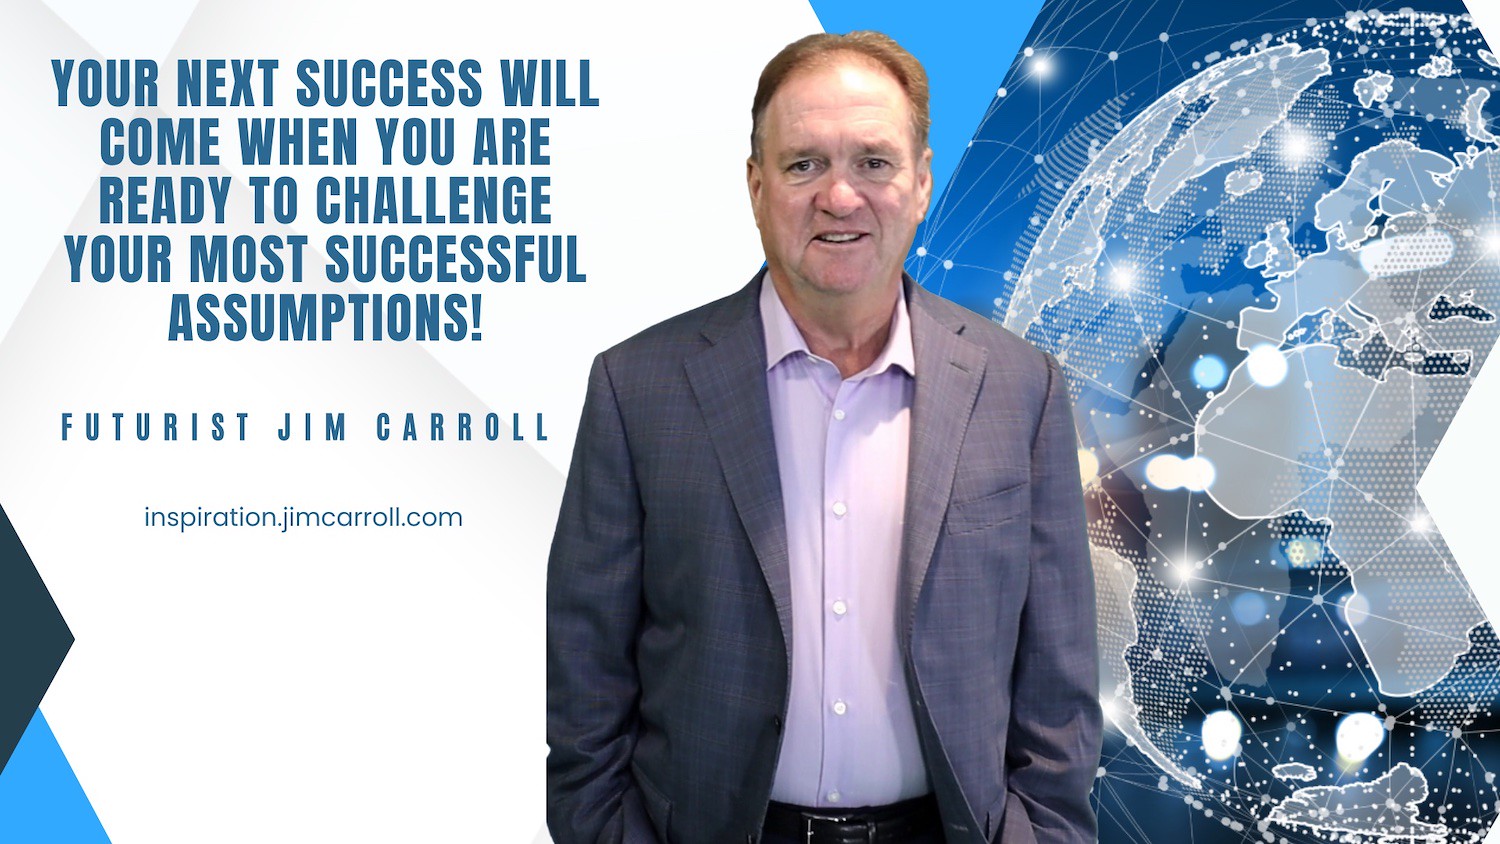 "Your next success will come when you are ready to challenge your most successful assumptions!" - Futurist Jim Carroll